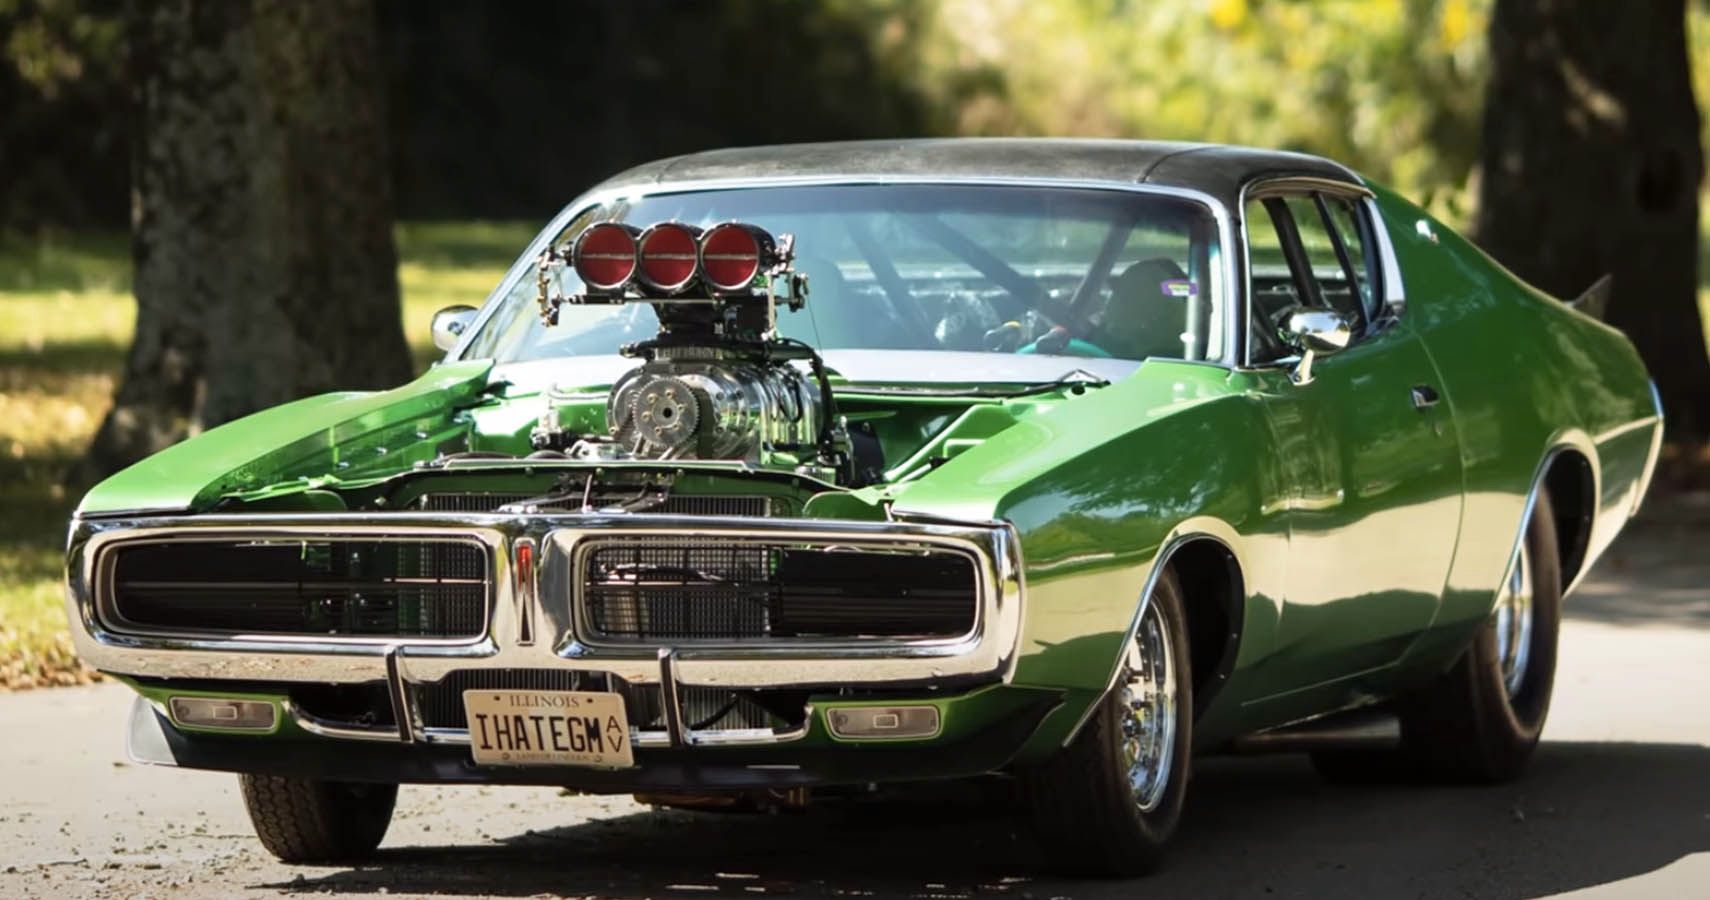 This Supercharged Dodge Charger Is Ready For Anything